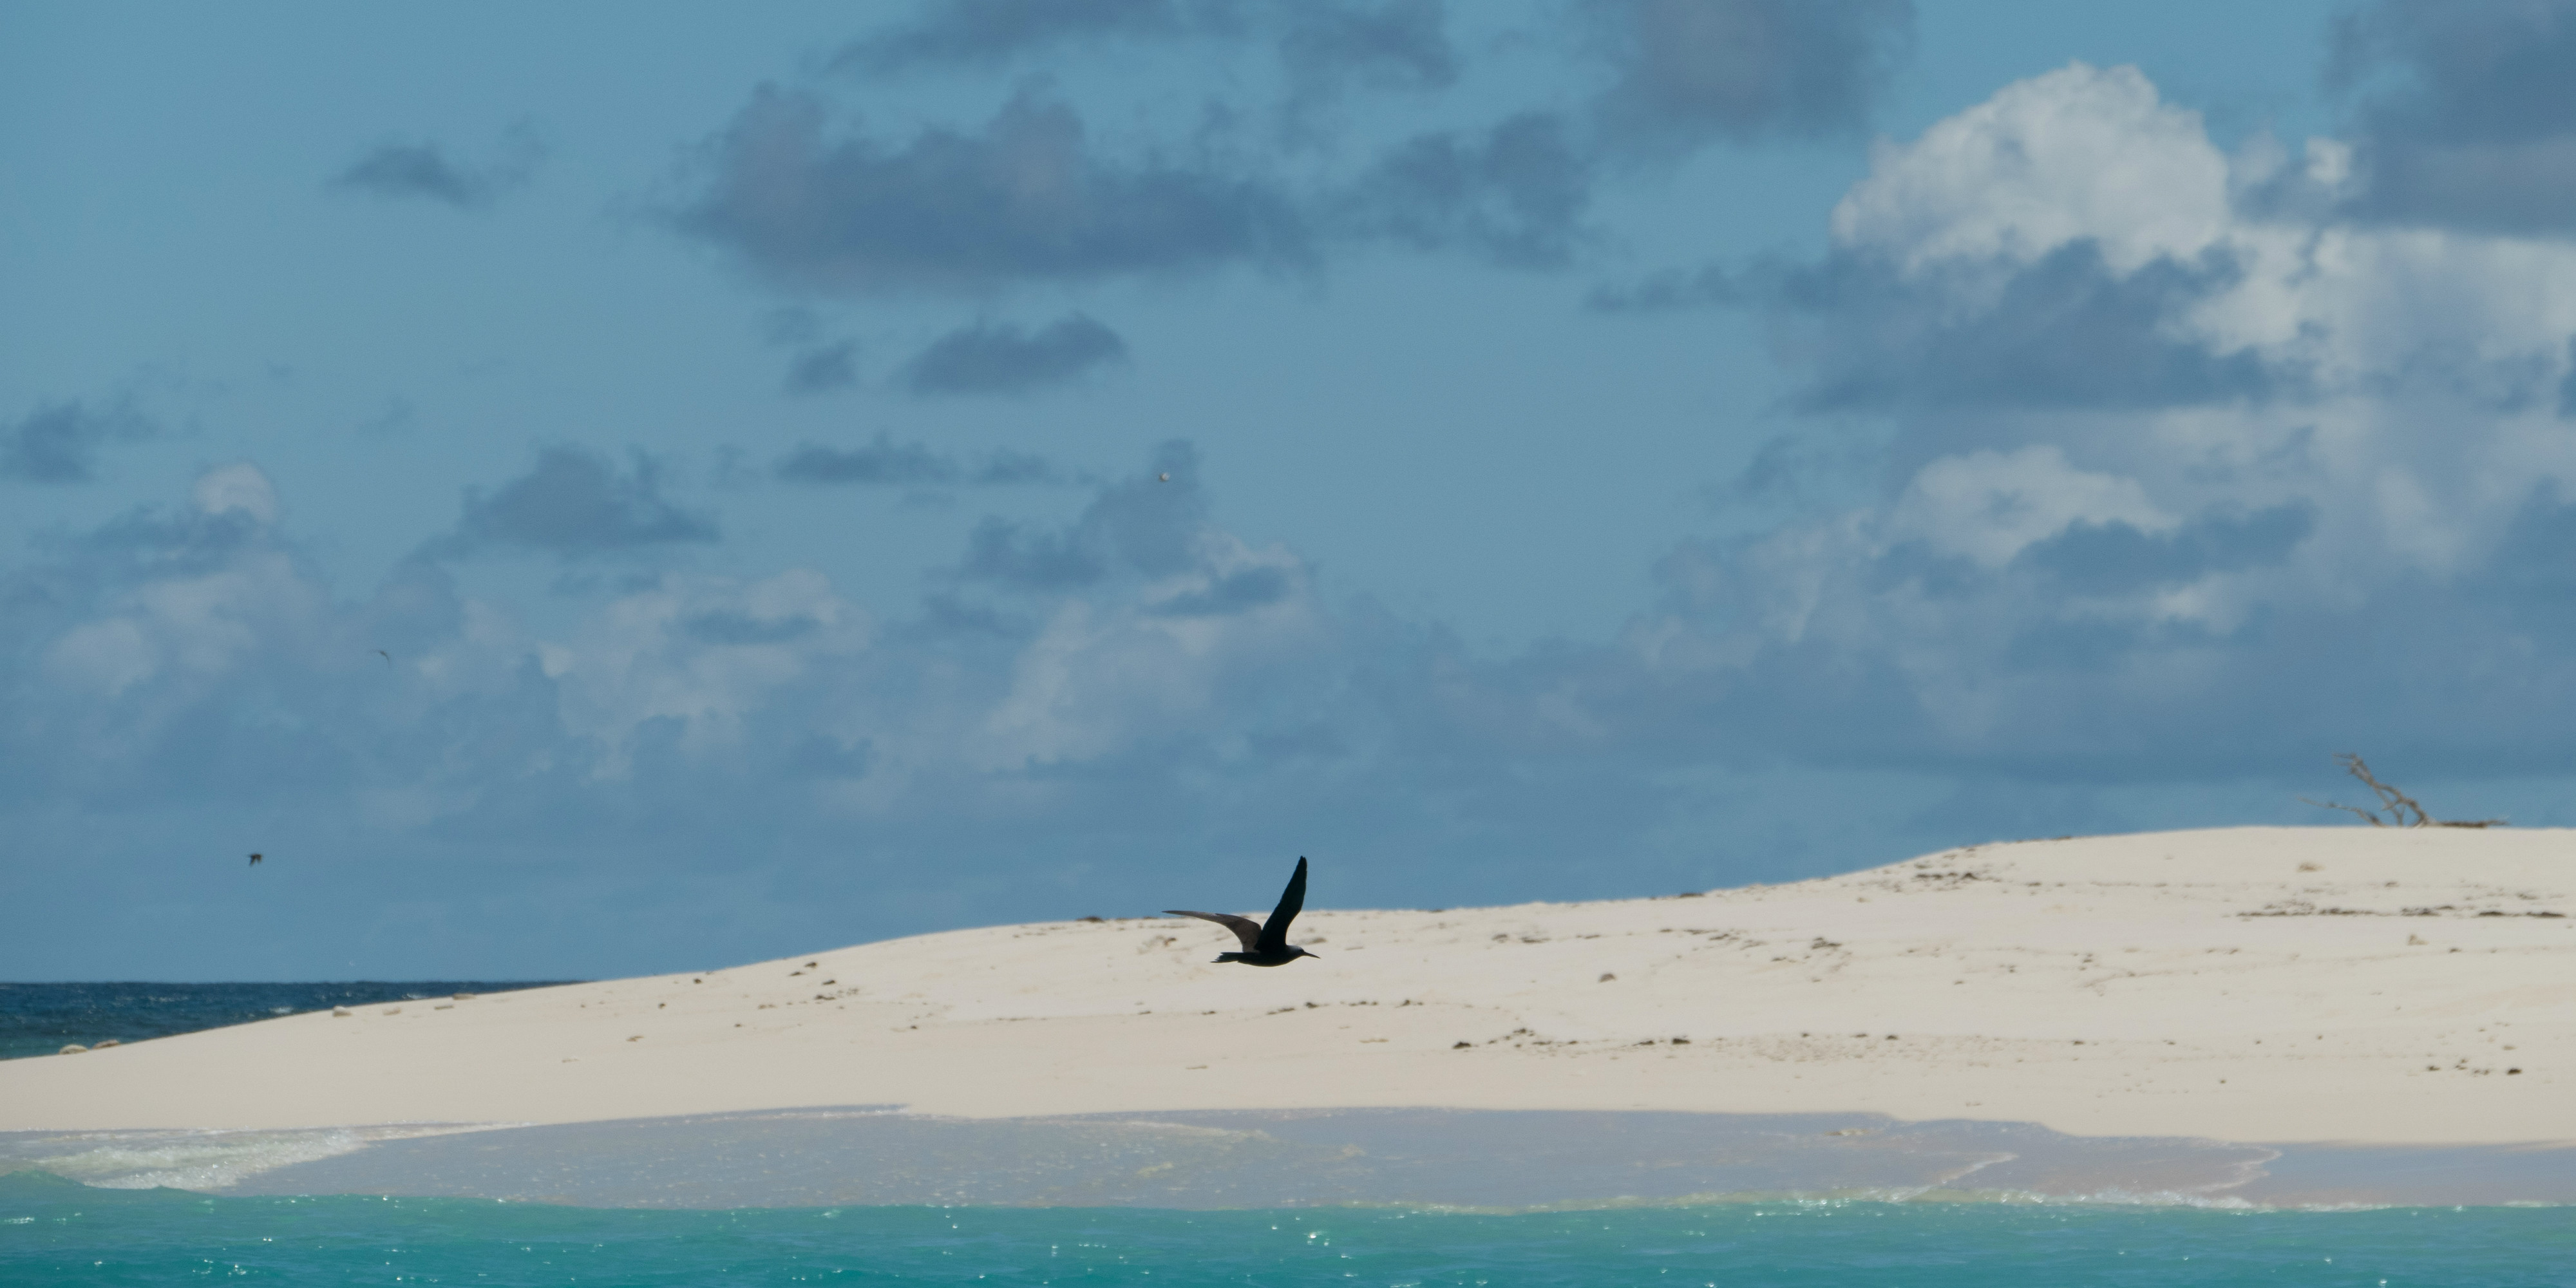 A bird glides gracefully on Bird Island, in the Seychelles archipelago home to many conservation projects.